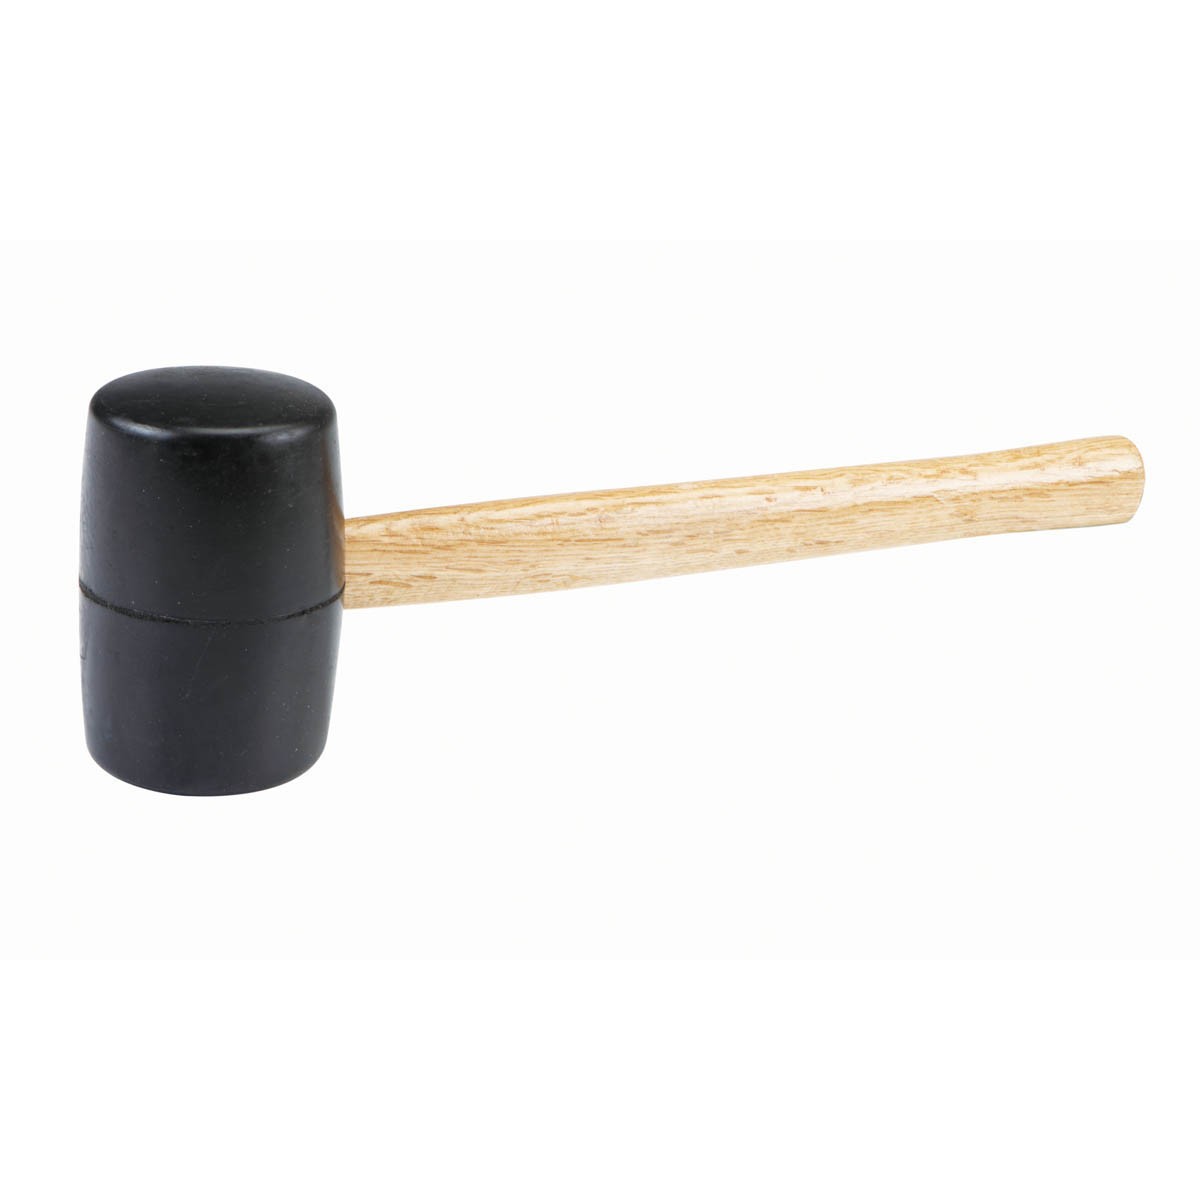 New   Pittsburgh  1 lb. Rubber Mallet